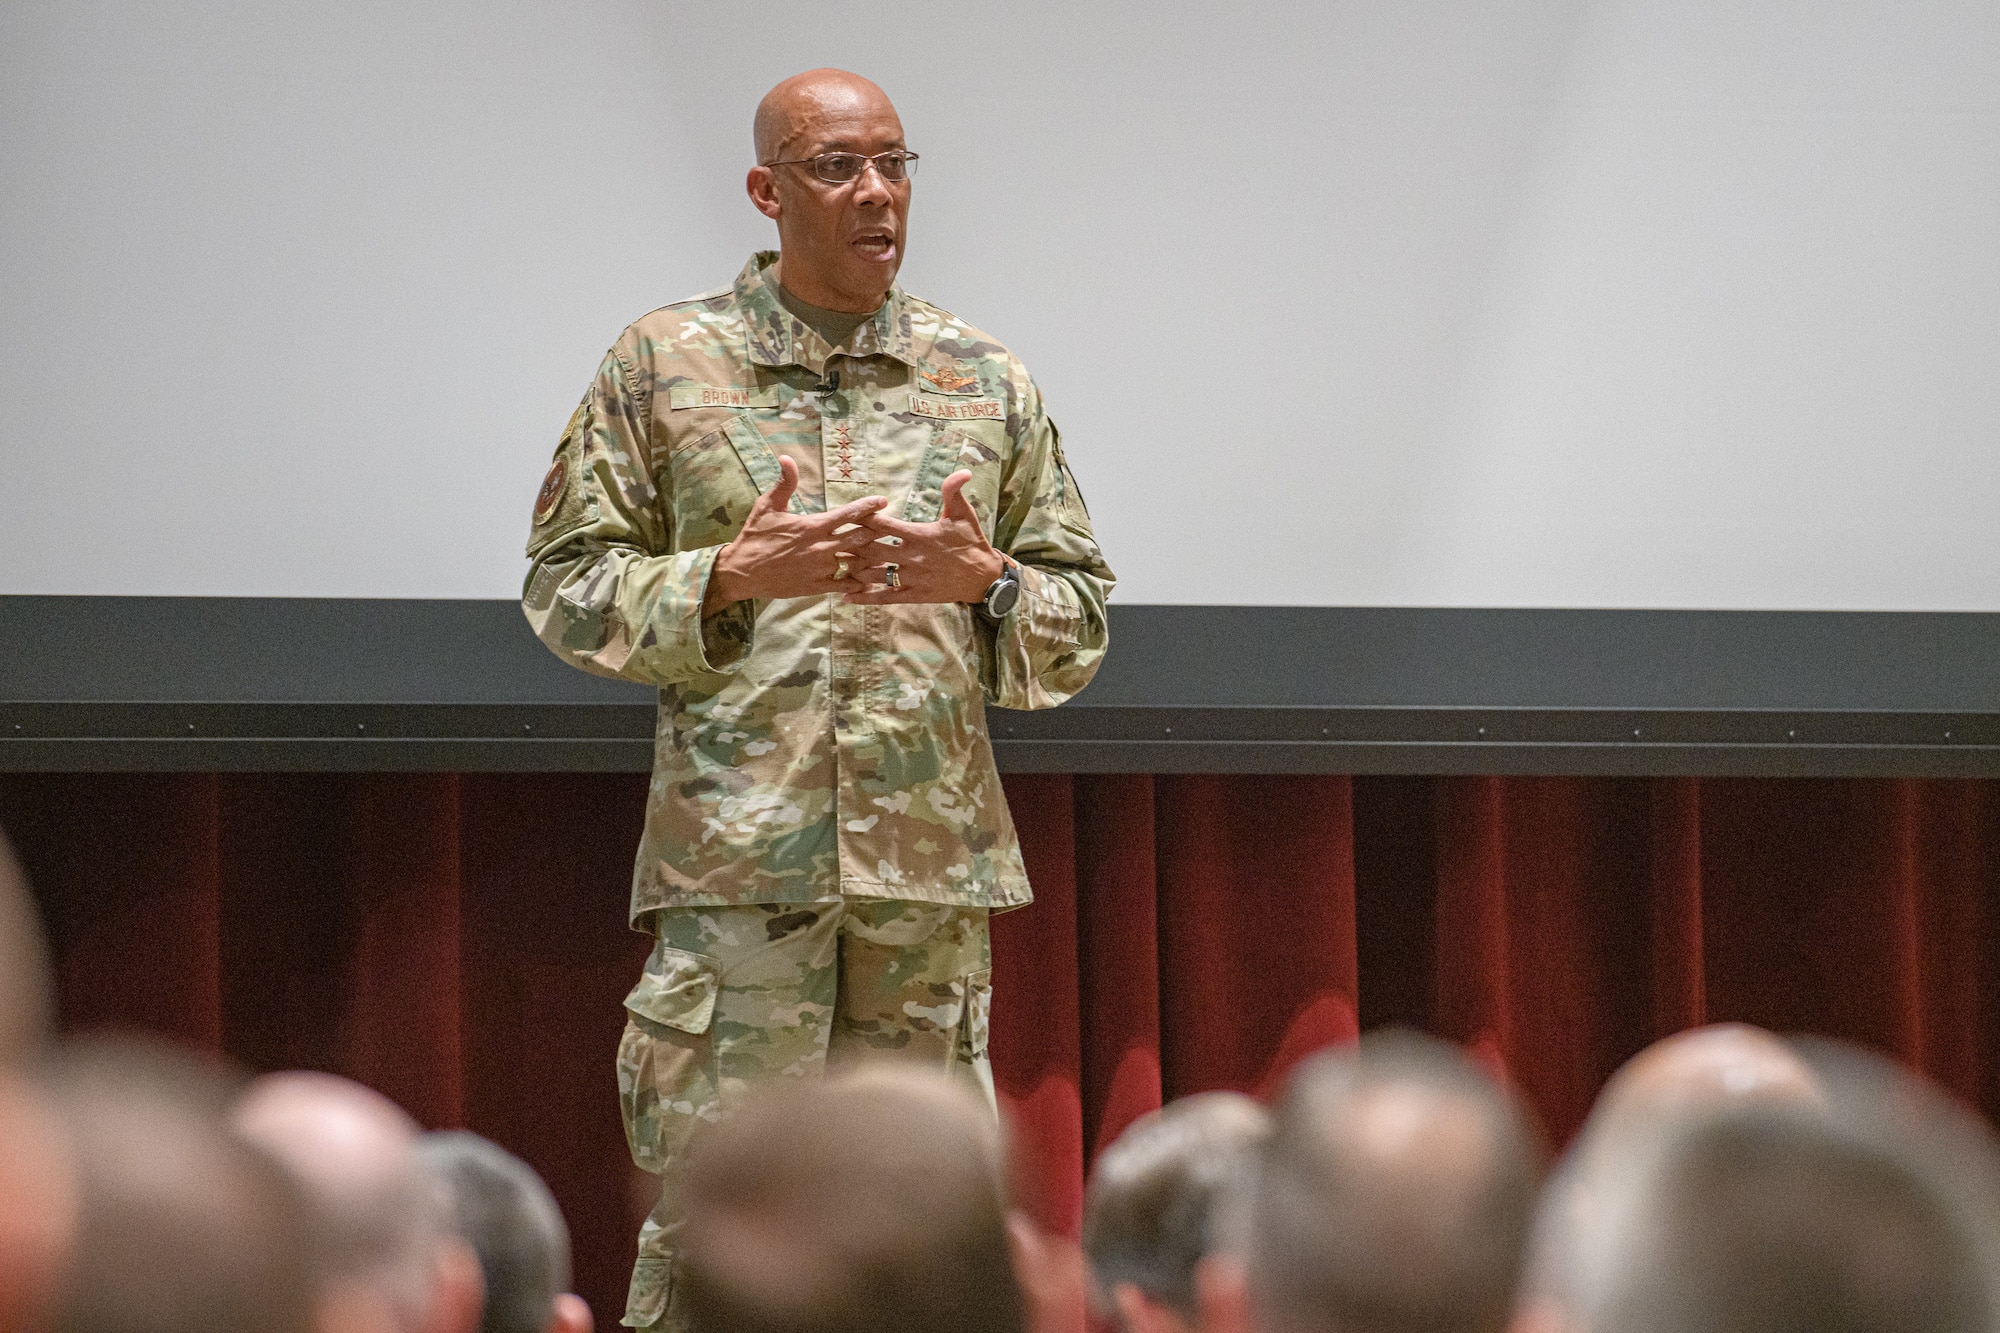 Air Force Chief of Staff Gen. CQ Brown, Jr. delivers a keynote address on the last day of the Secretary of the Air Force’s National Security Forum, held at Air University’s Air War College, Maxwell Air Force Base, Montgomery, Alabama, May 10-12, 2022. Brown was one of several military and government civilian leaders who engaged in national security discussions with 88 invited civic leaders from across the country during the forum, which is in its 68th year.